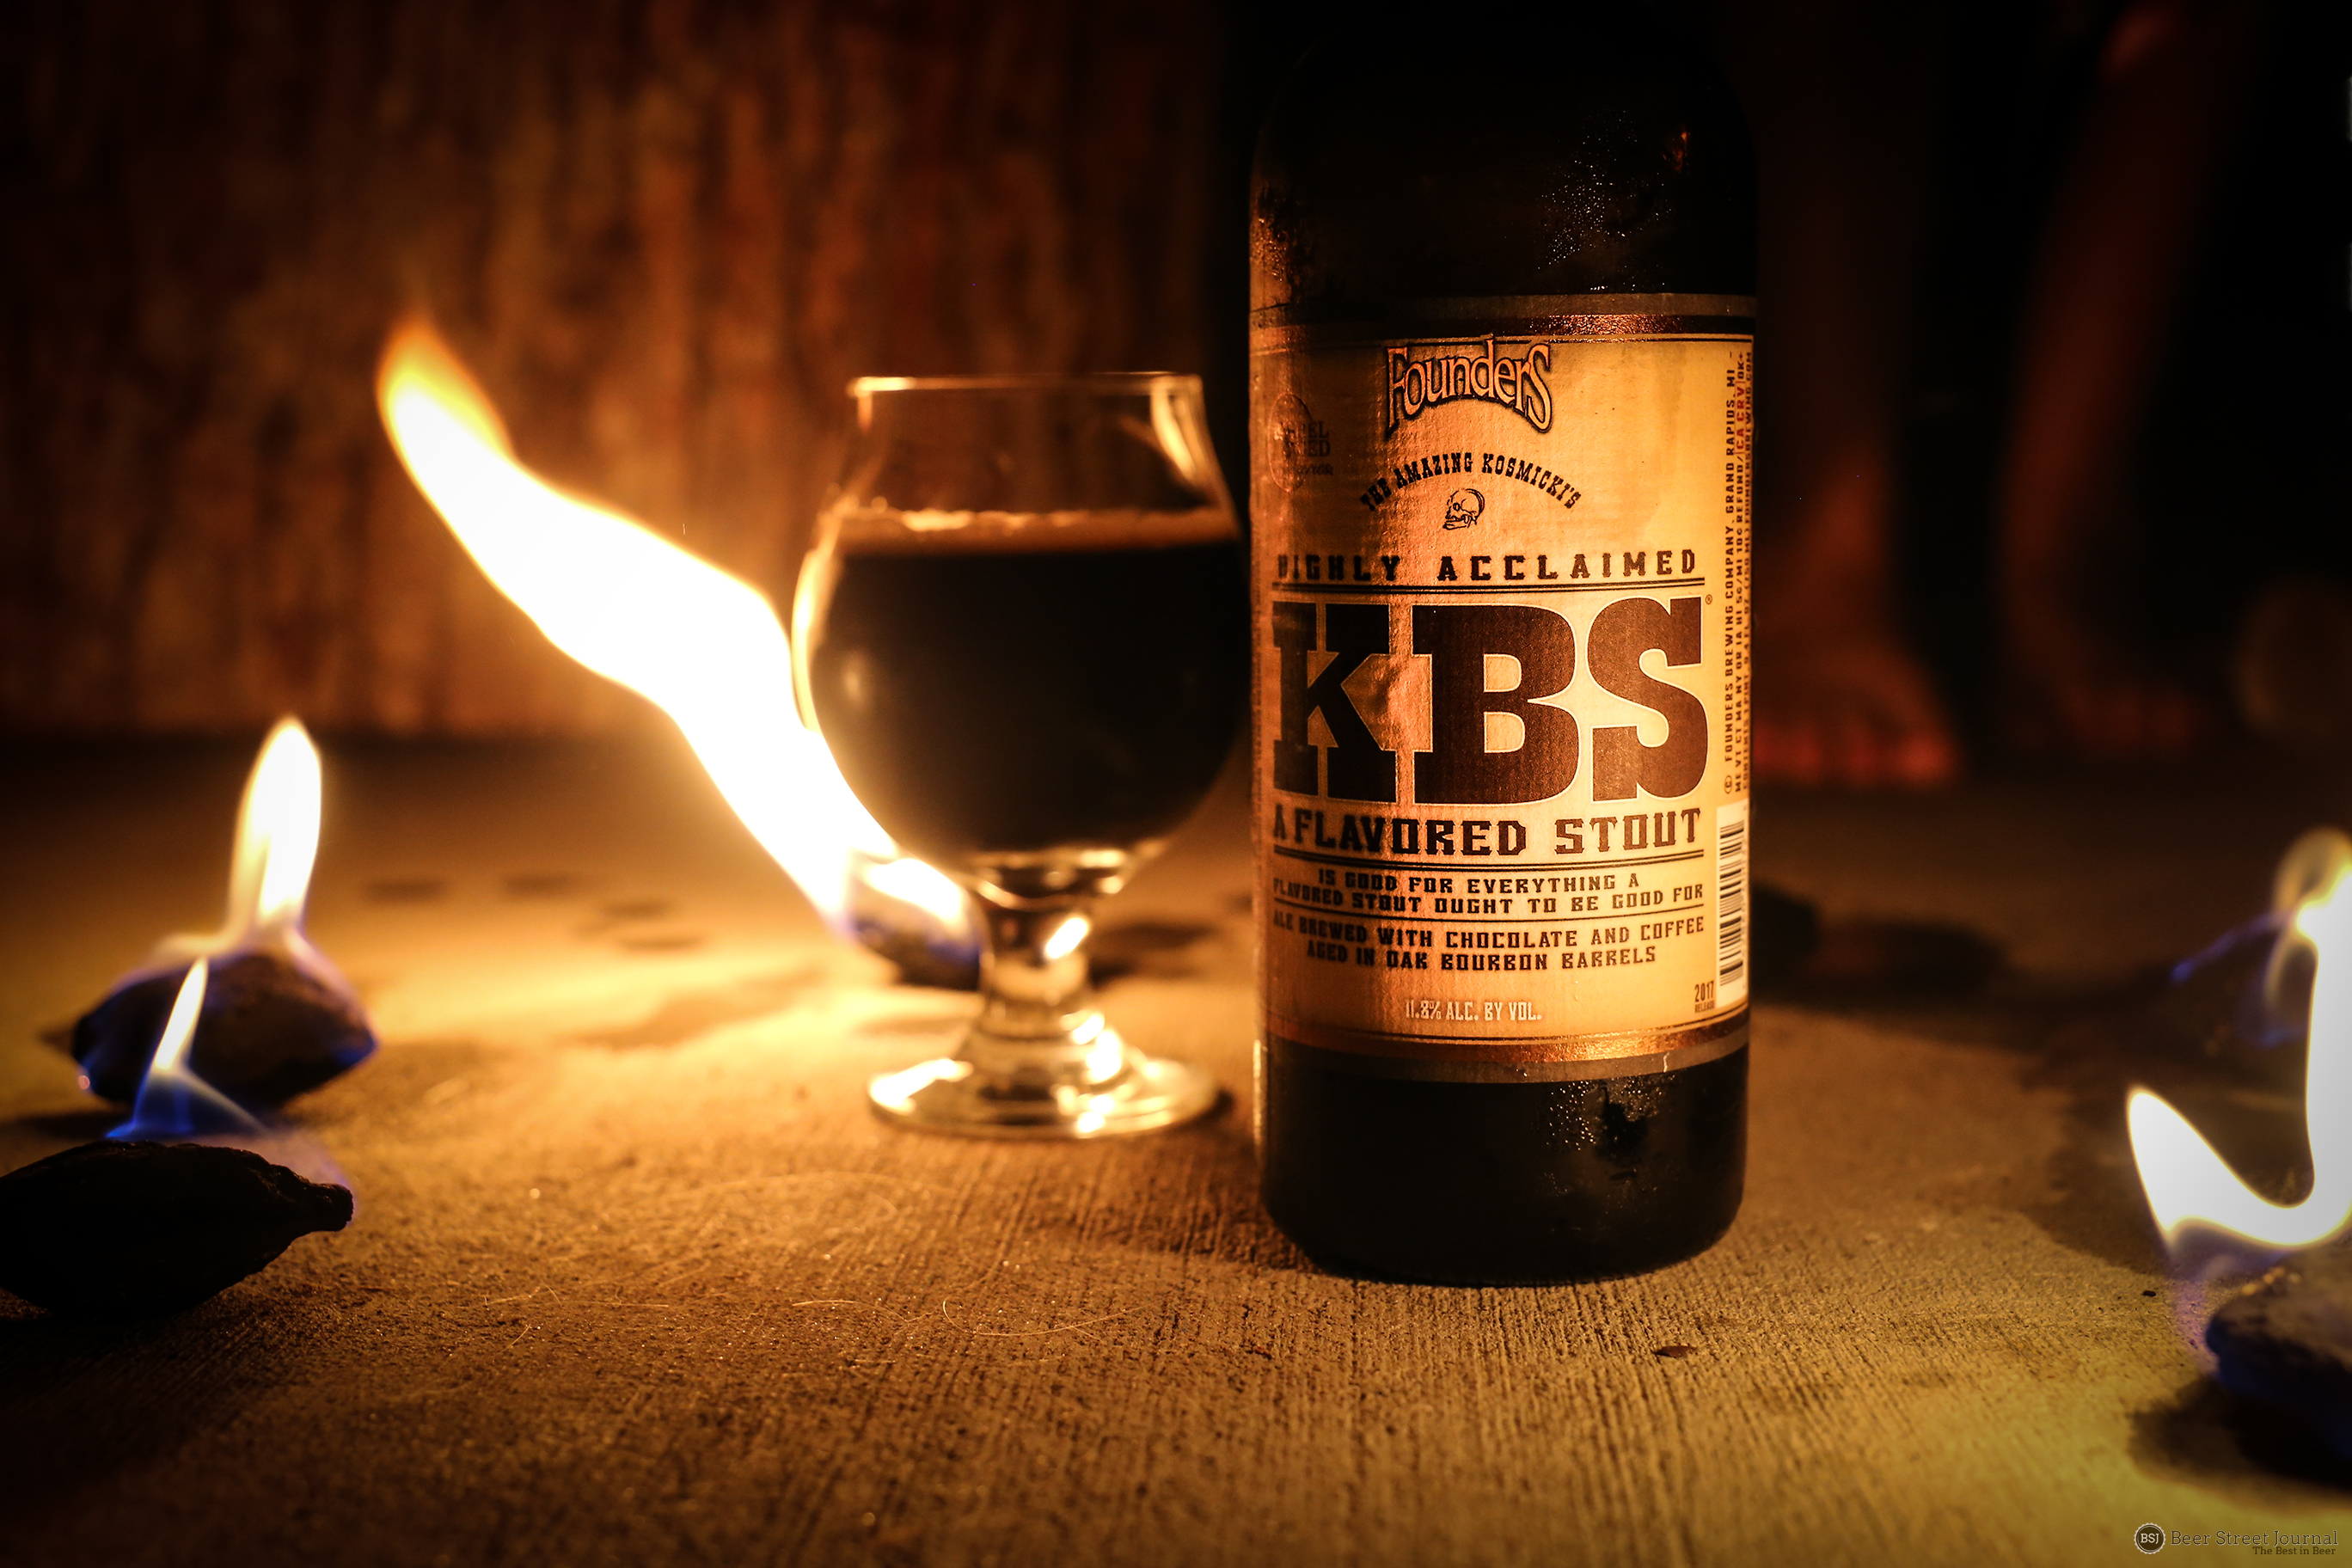 founders-kbs-rises-again-one-of-the-best-years-we-ve-ever-tasted